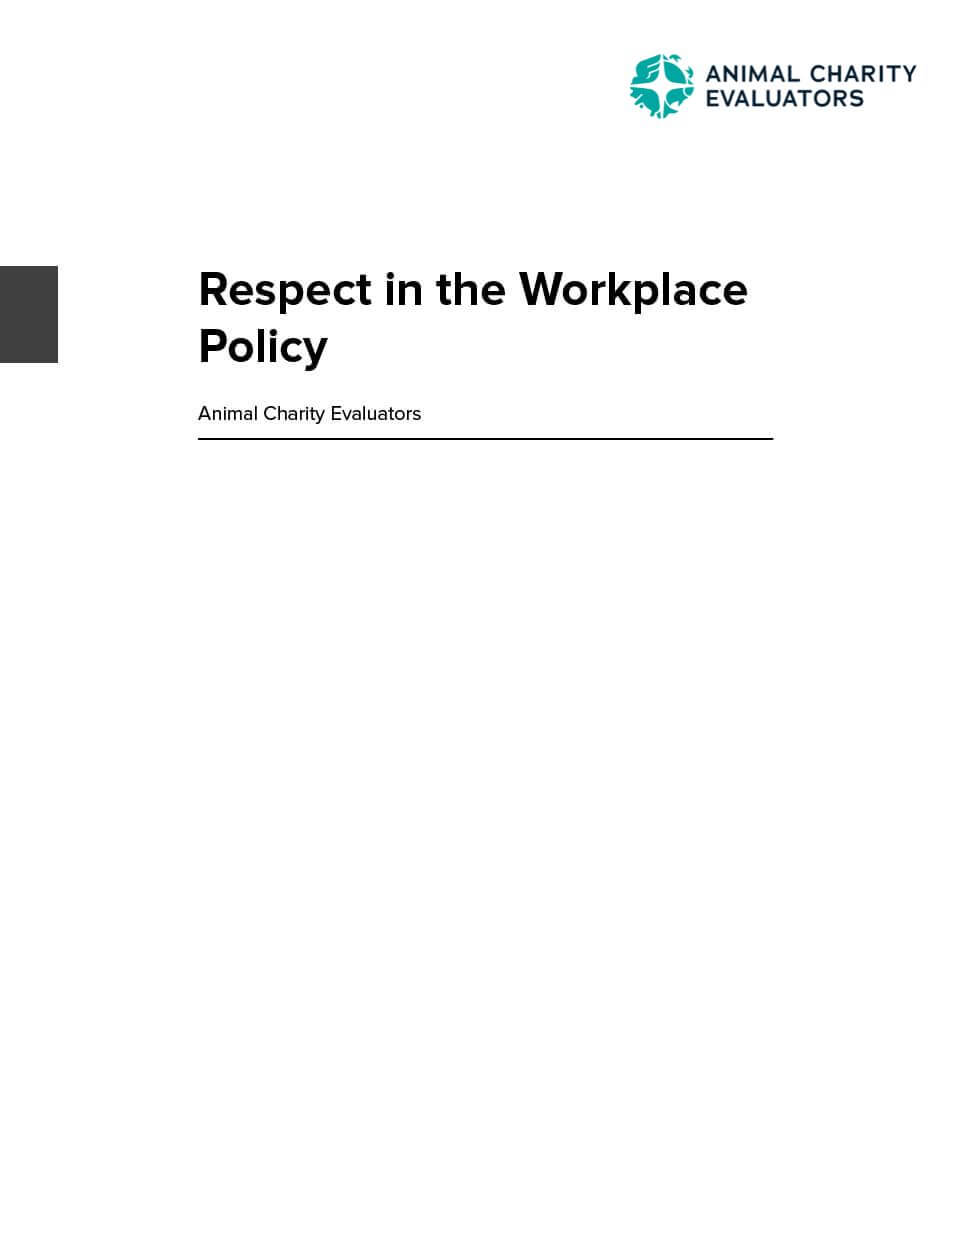 Respect in the Workplace Policy Image